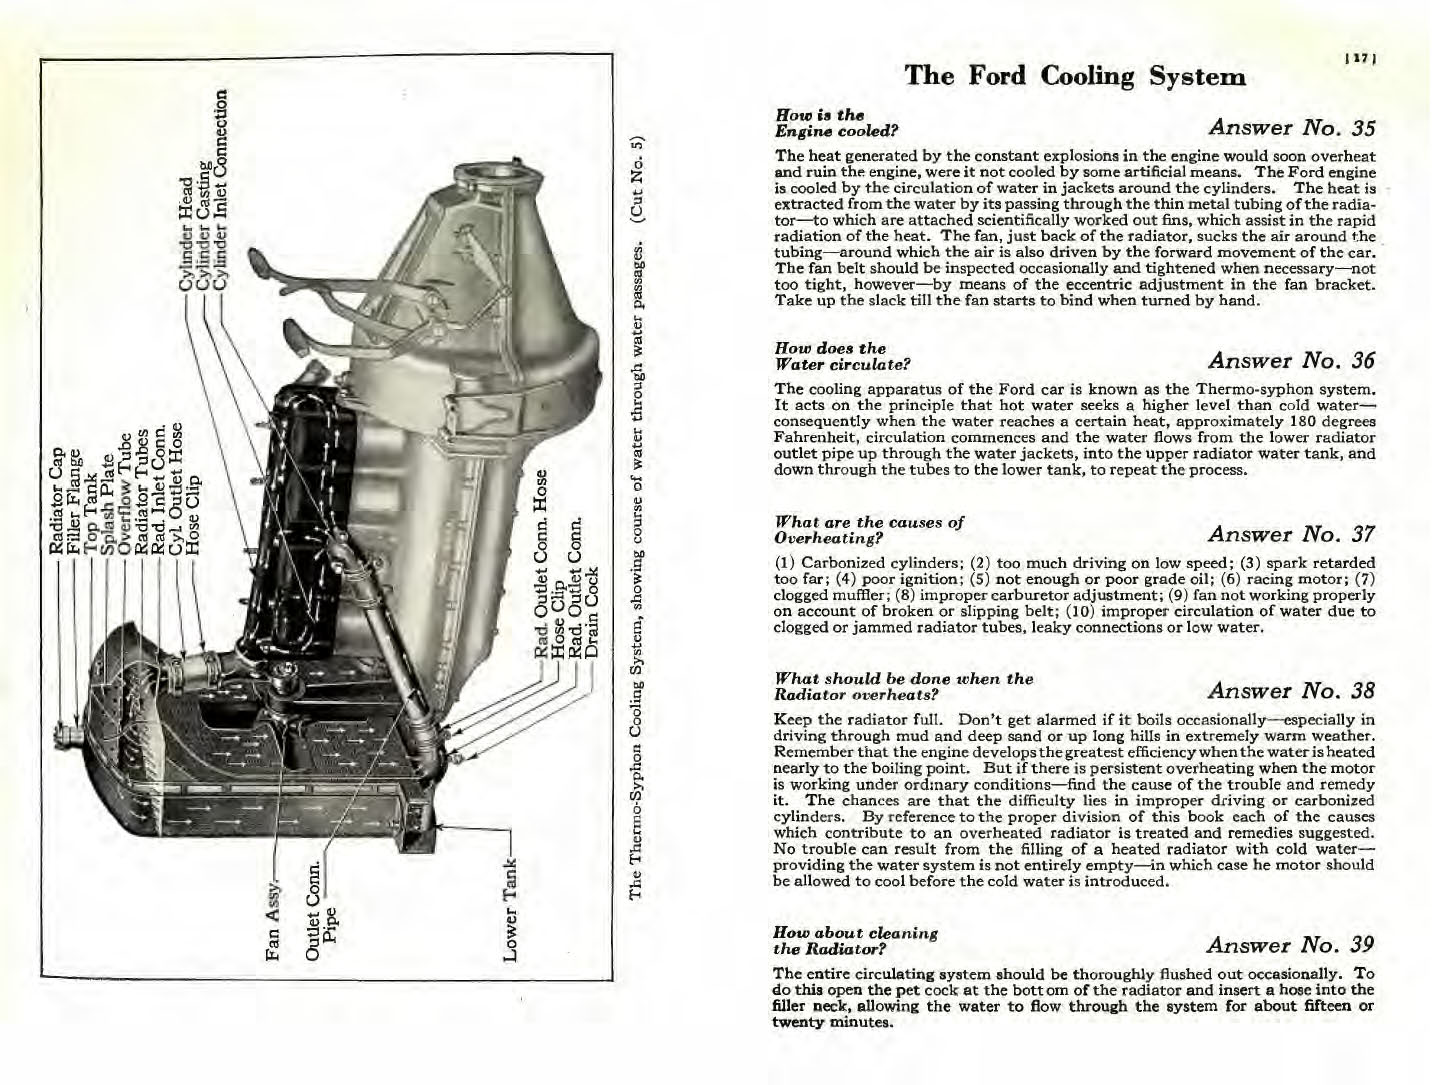 1926_Ford_Owners_Manual-16-17